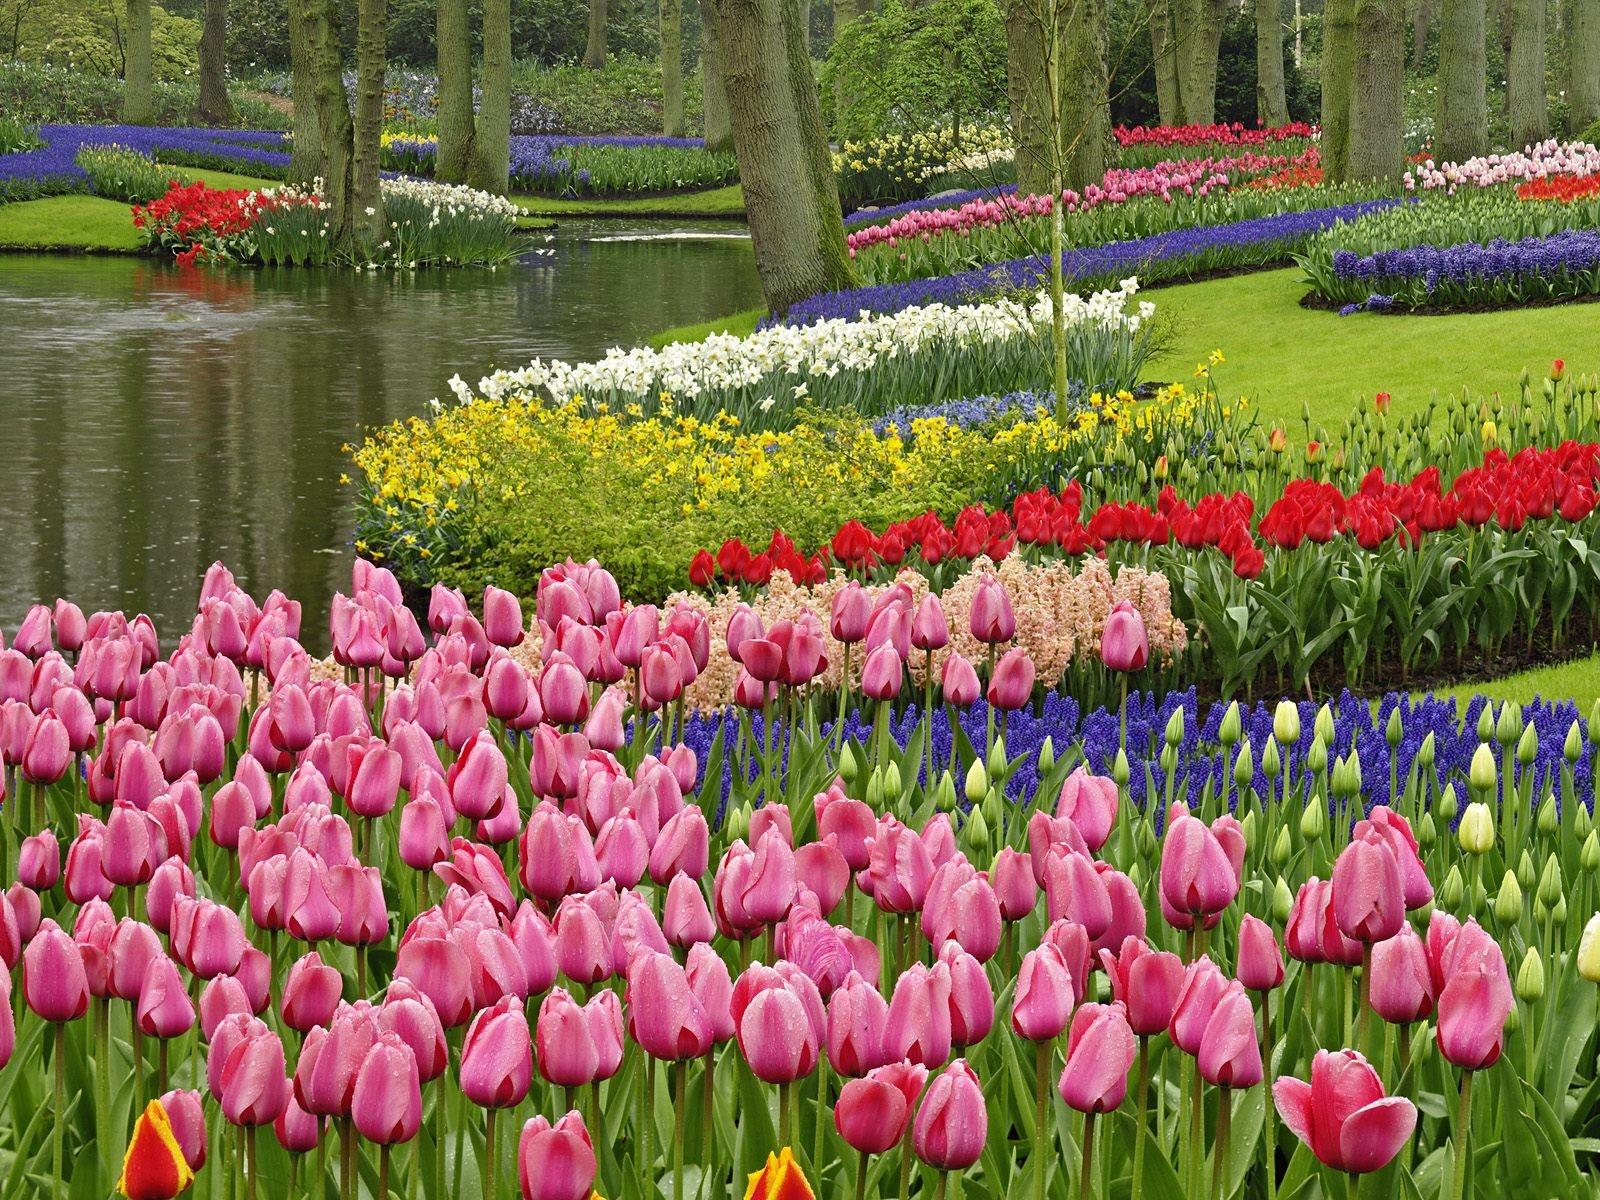 A garden with many different colored flowers - Garden